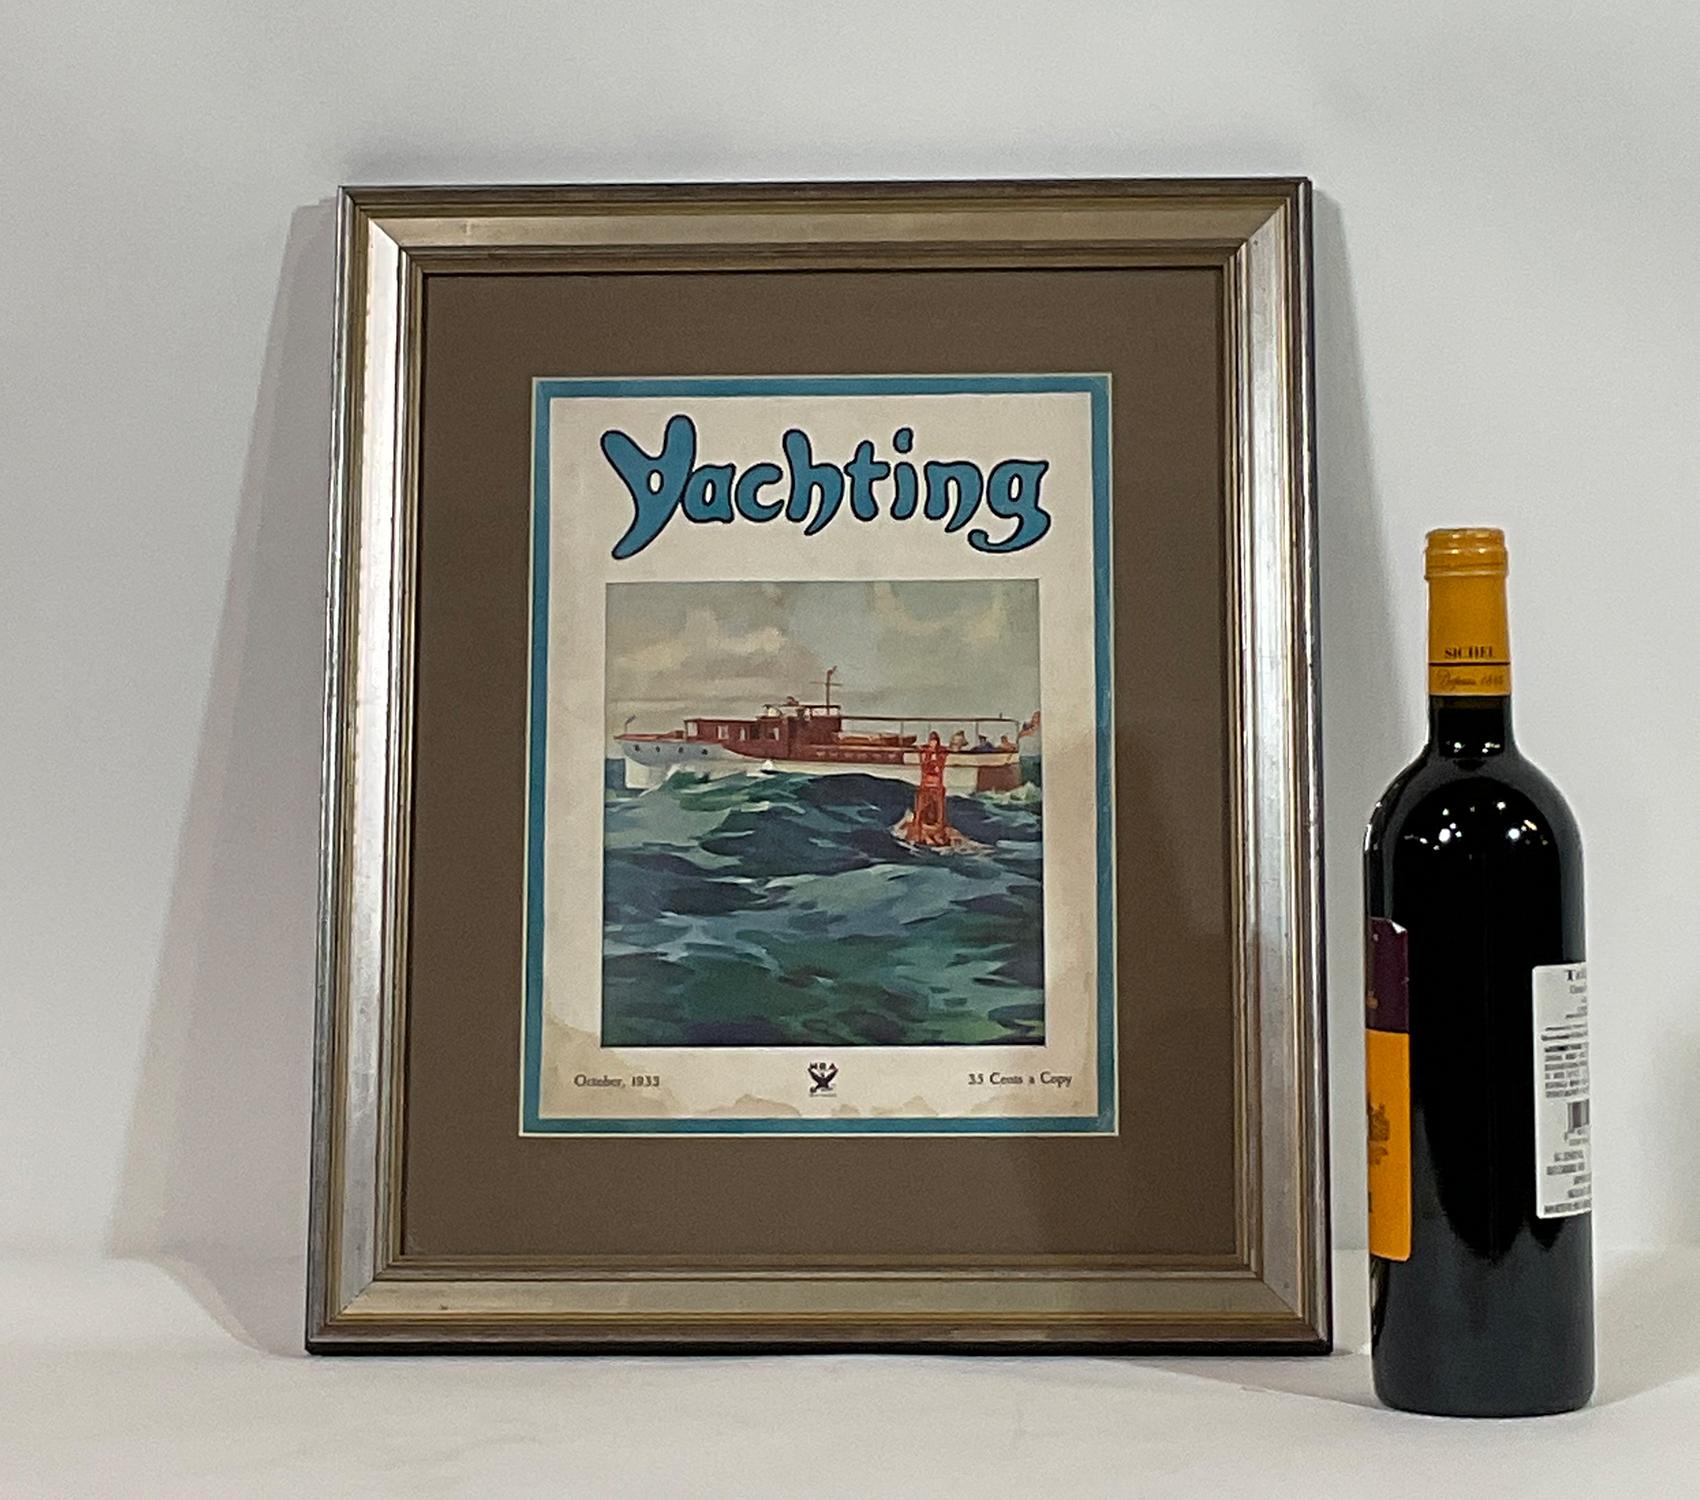 North American Yachting Magazine Cover in Frame For Sale